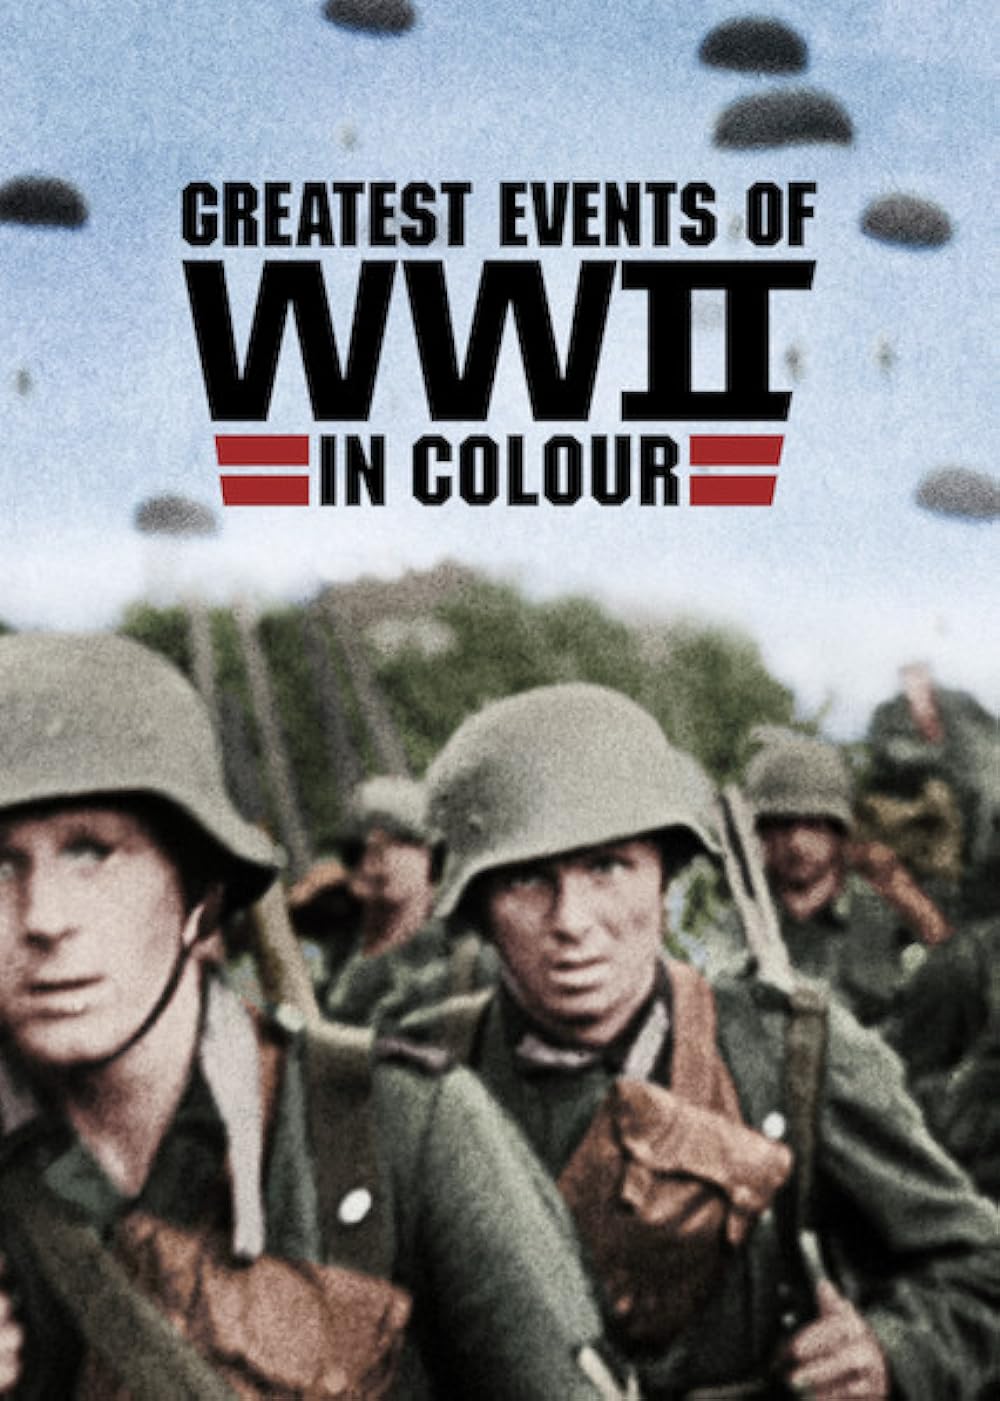 Greatest Events of WWII in Colour (2019) S1 EP7 Battle of the Bulge 128Kbps 25Fps 48Khz 2.0Ch DD+ NF E-AC3 Turkish Audio TAC